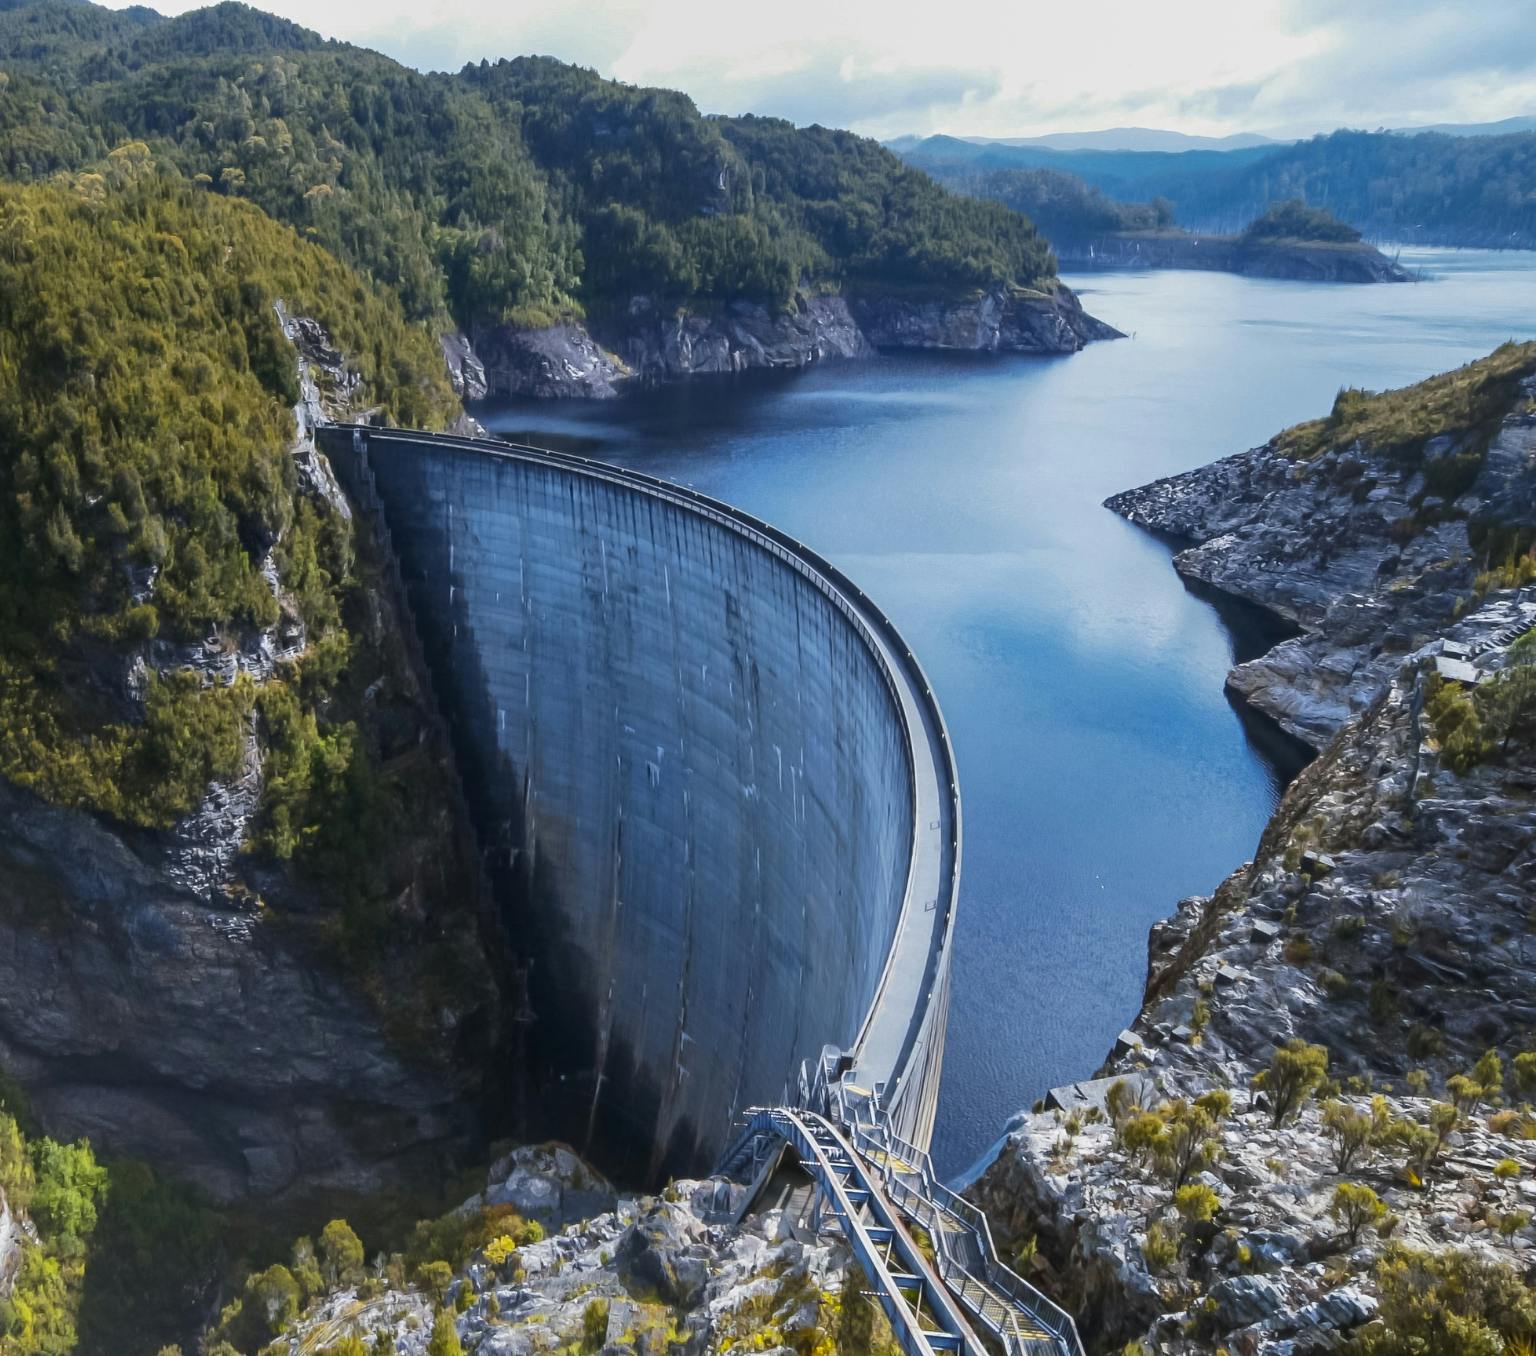 A large concrete dam wall, with a large body of water on one side, surrounded by mountains and forest.